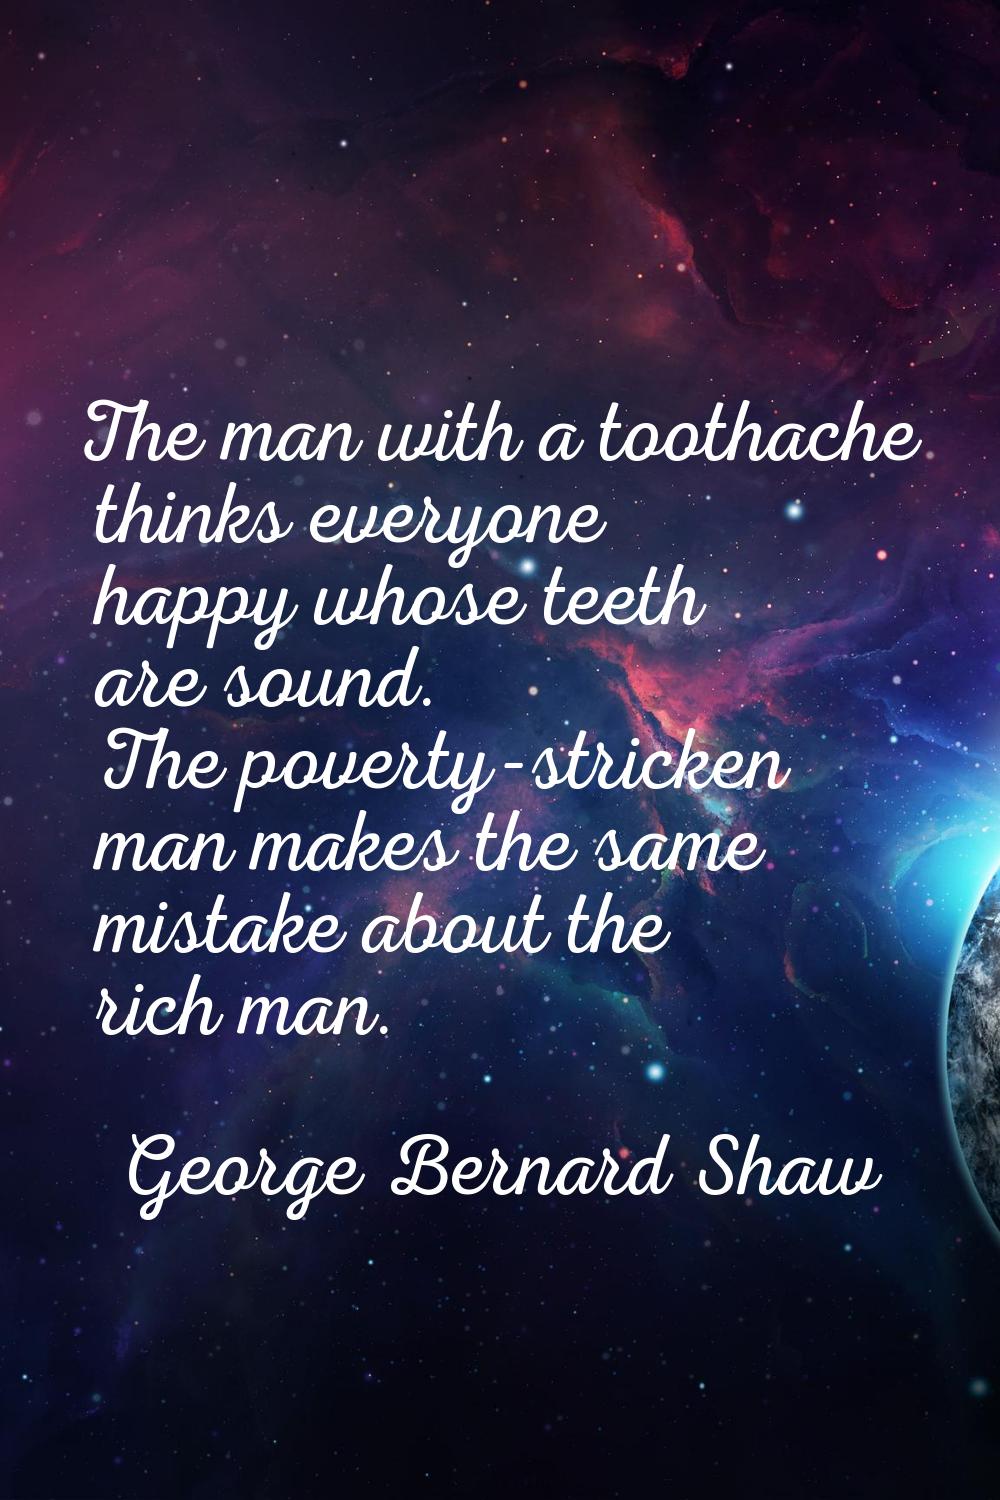 The man with a toothache thinks everyone happy whose teeth are sound. The poverty-stricken man make